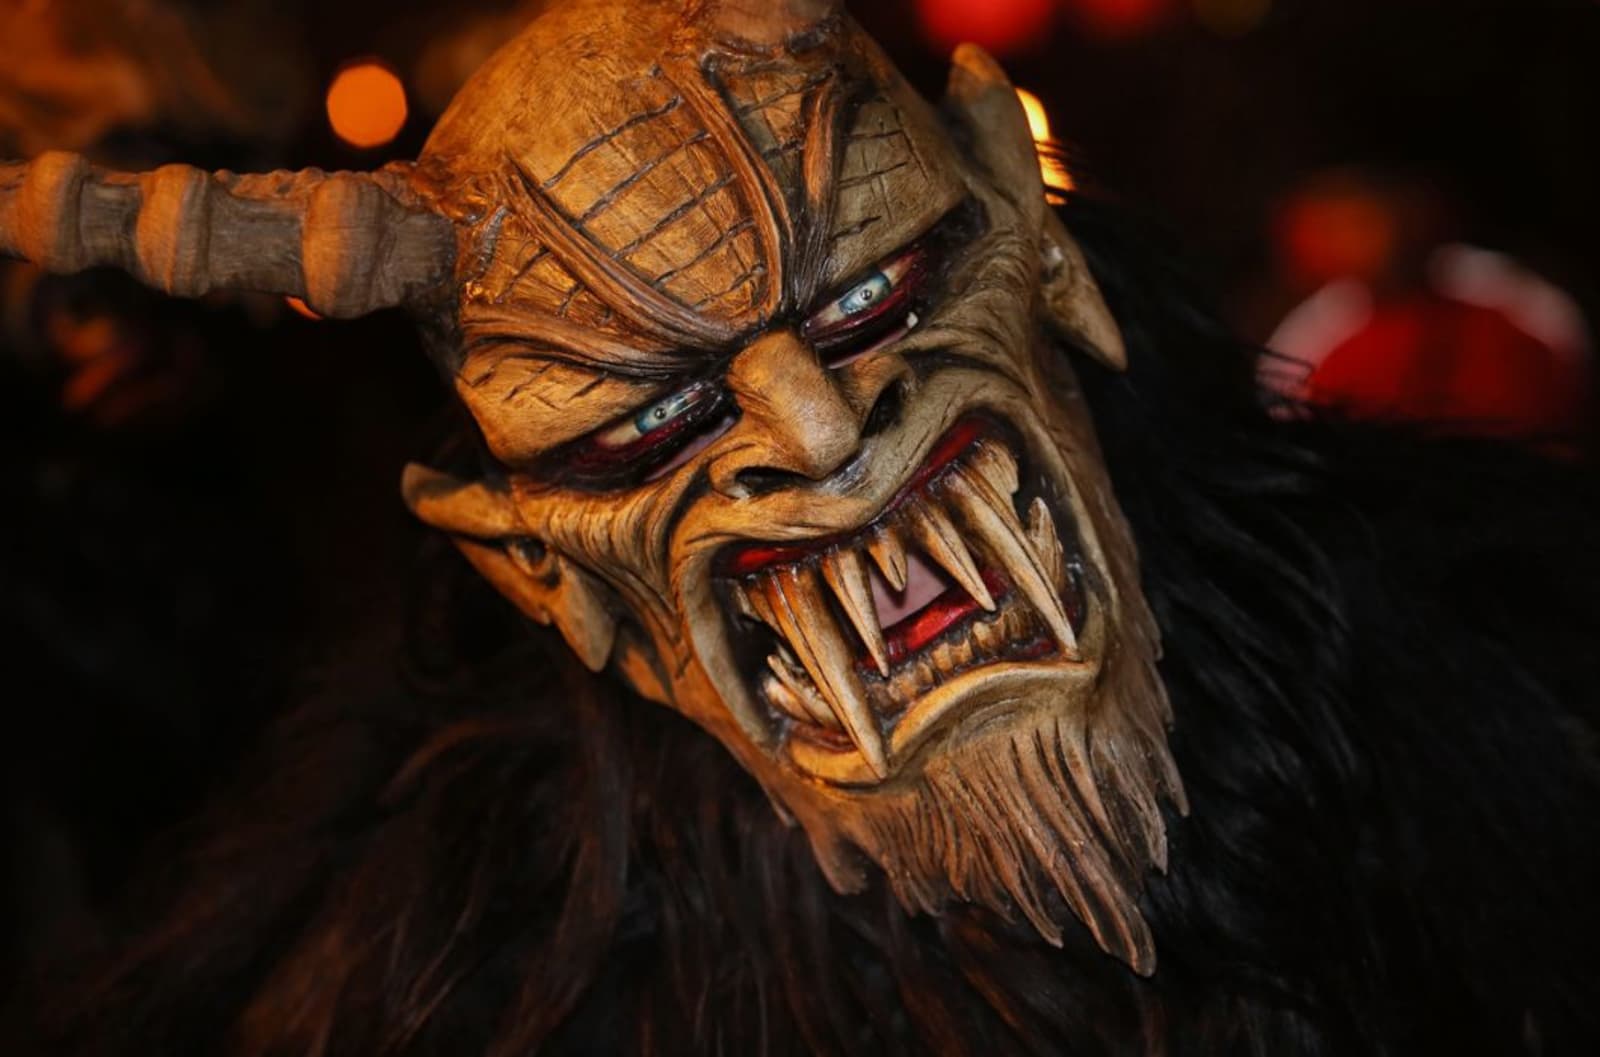 A person wearing a Krampus costume with large horns, sharp teeth and long hair.